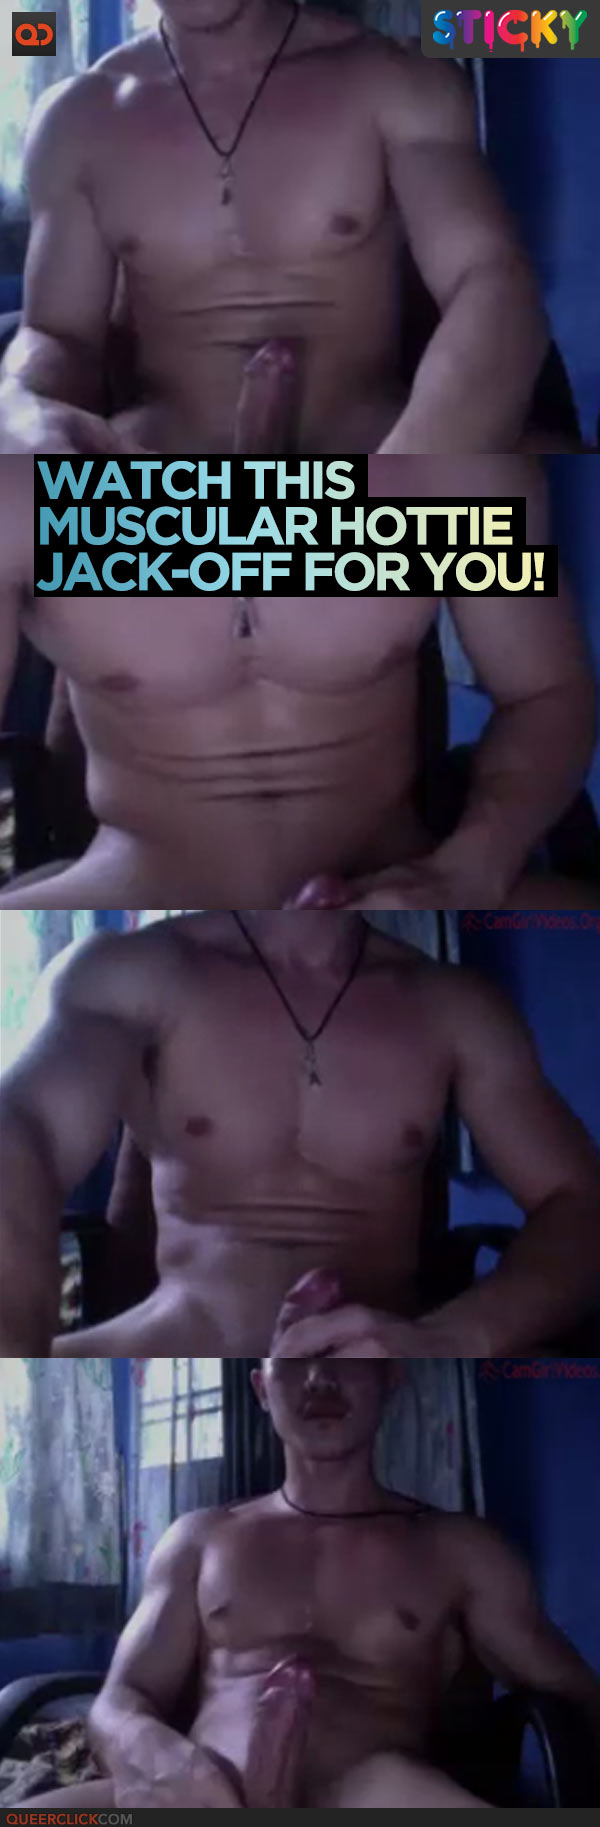 Watch This Muscular Hottie Jack-Off For You!